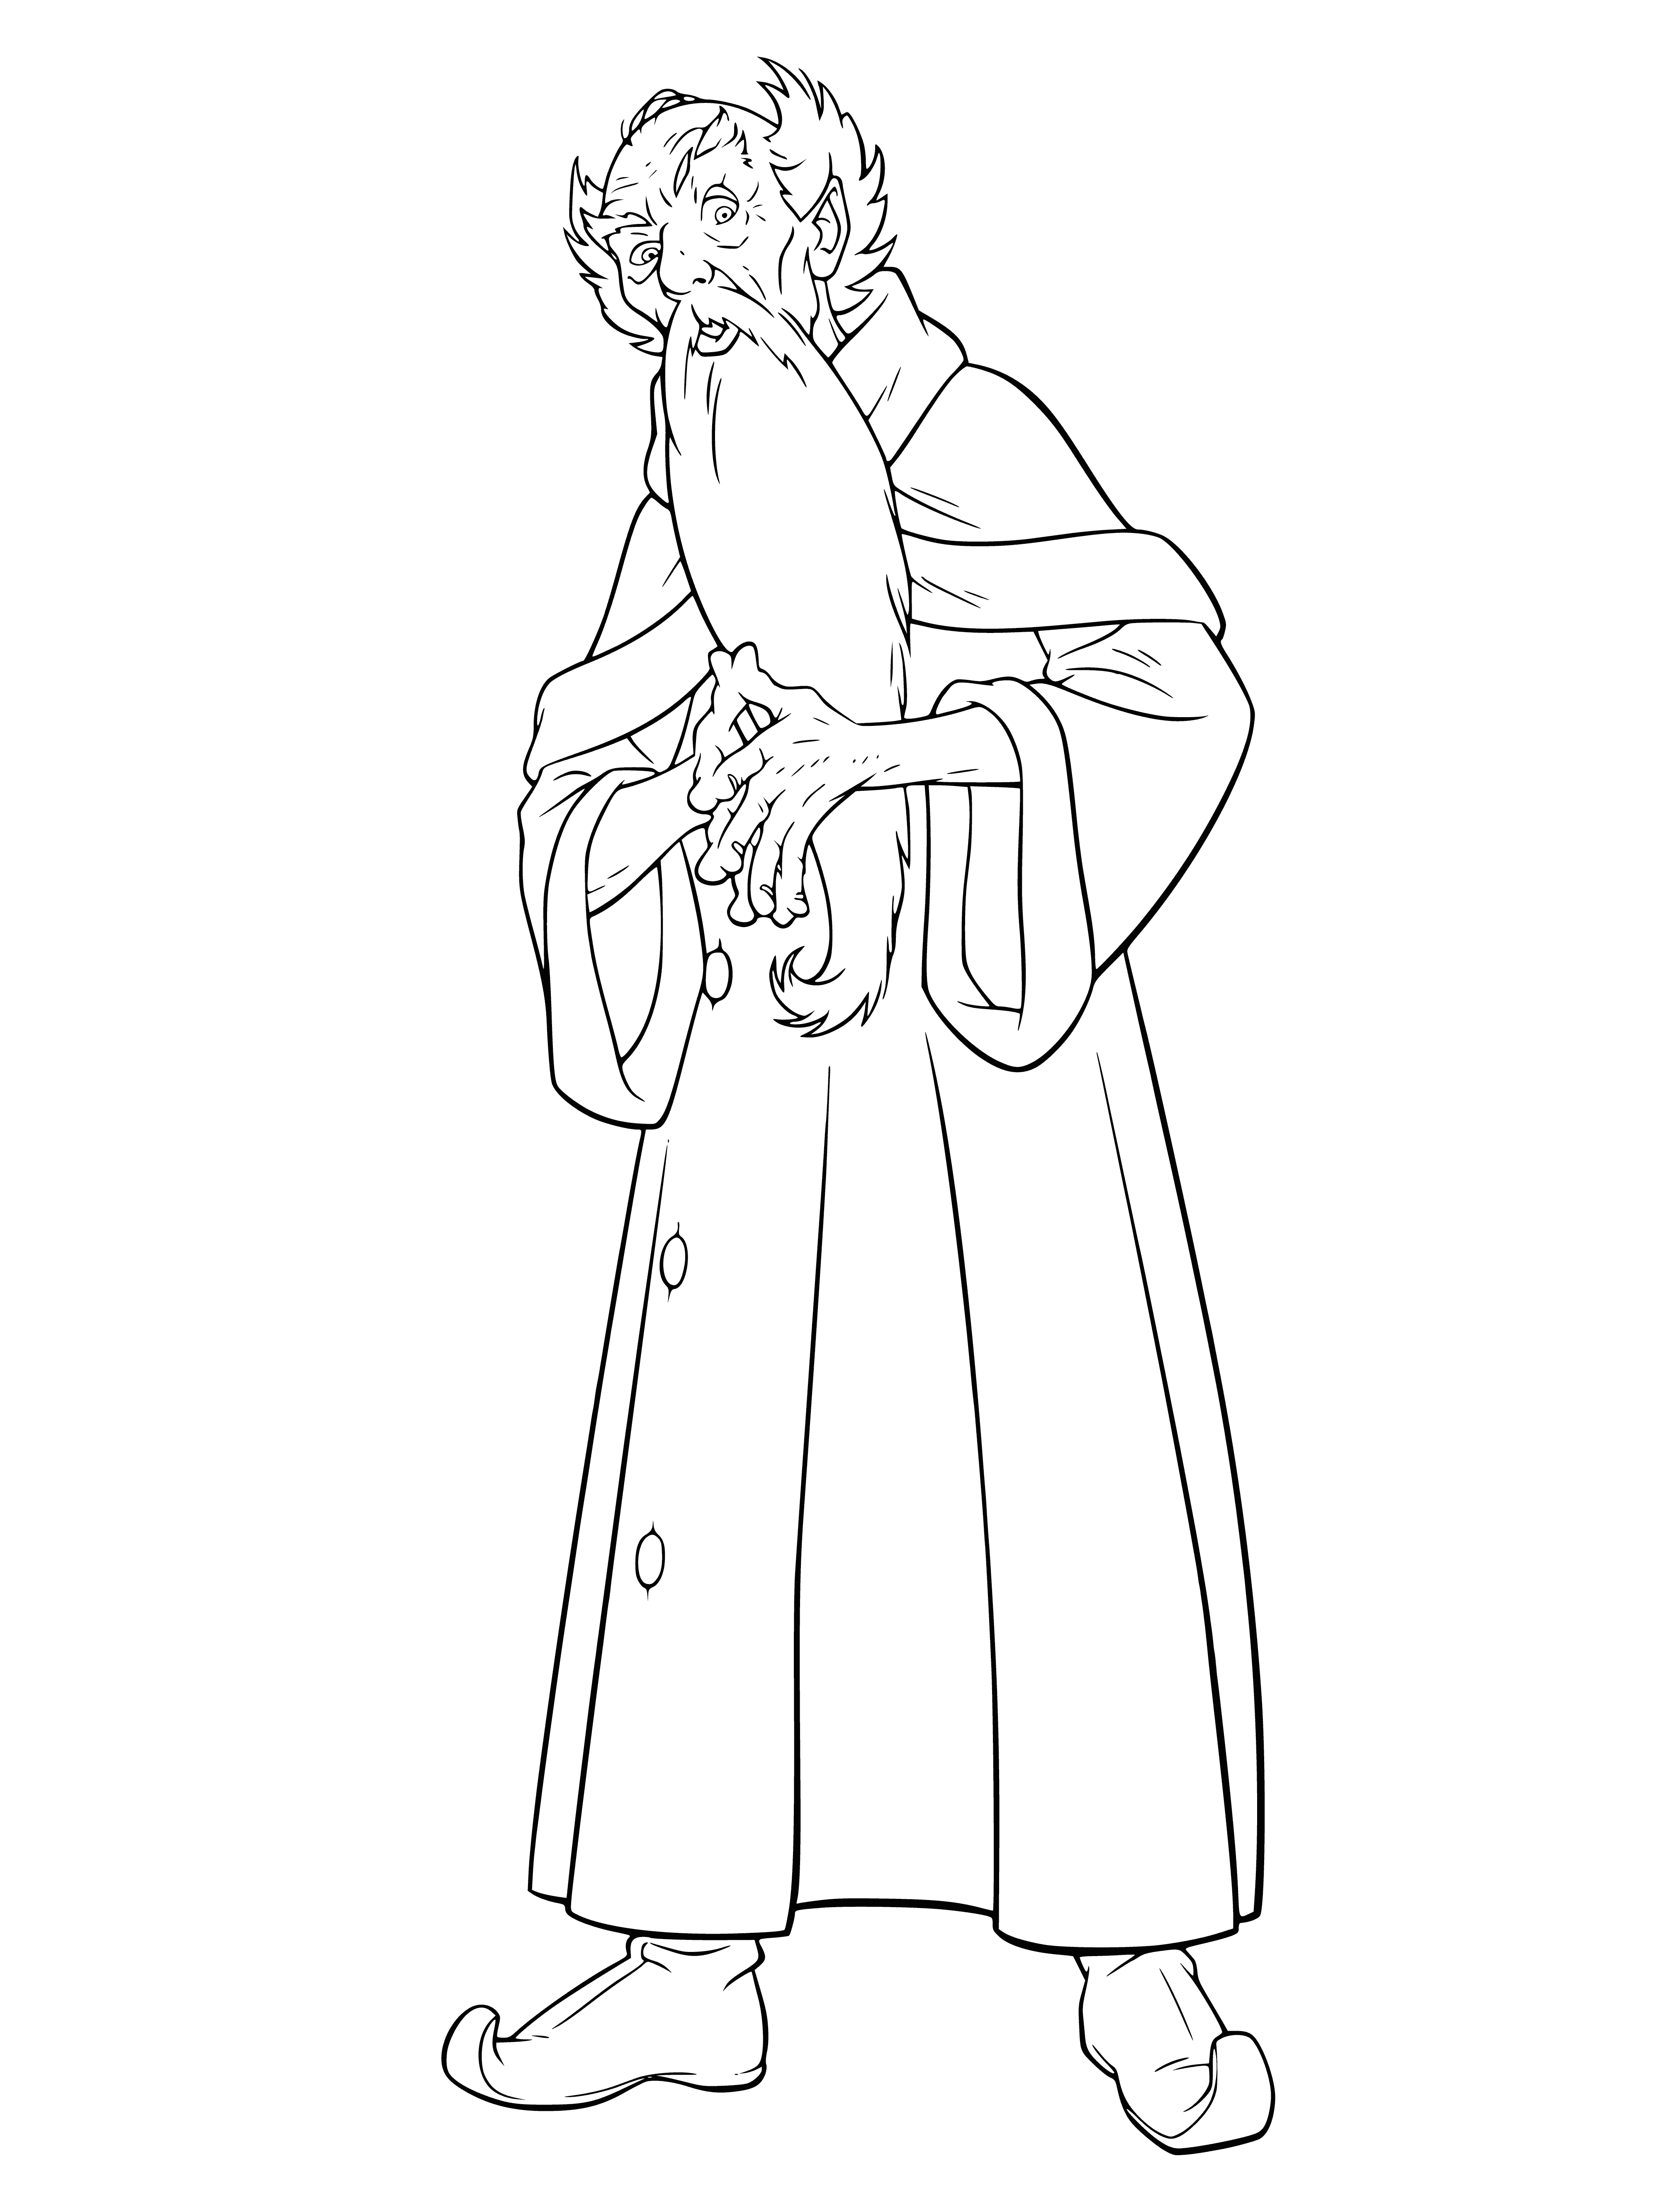 coloring page: Ollivander, an old man with a long, hooked nose and a wand, stands in a dimly lit room with shelves filled with wand boxes.